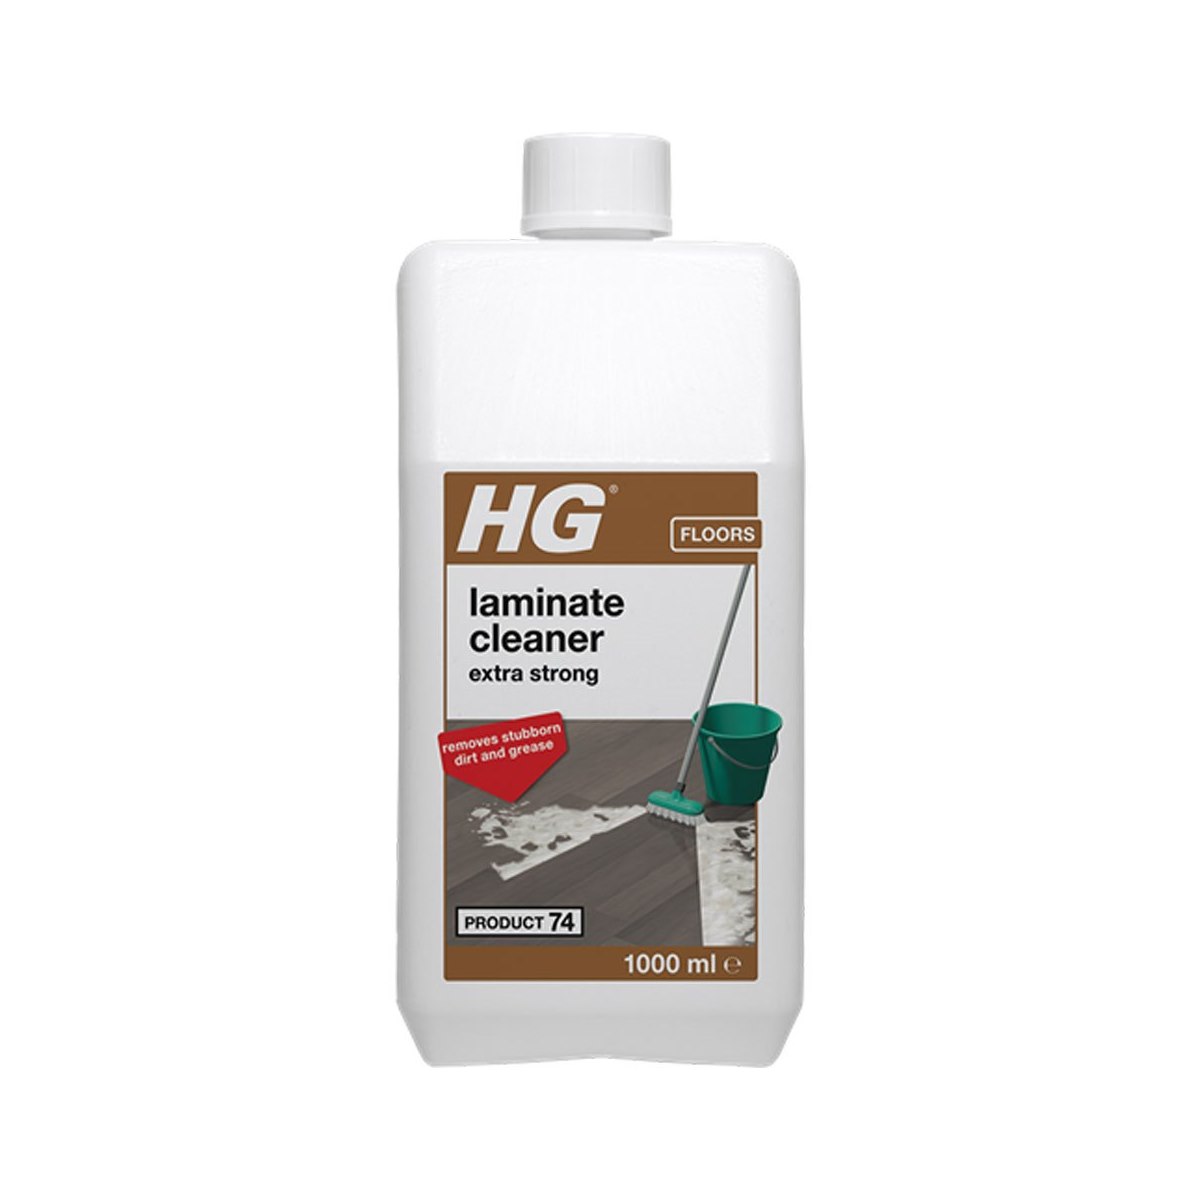 HG Laminate Cleaner Extra Strong 1 Litre Product 74